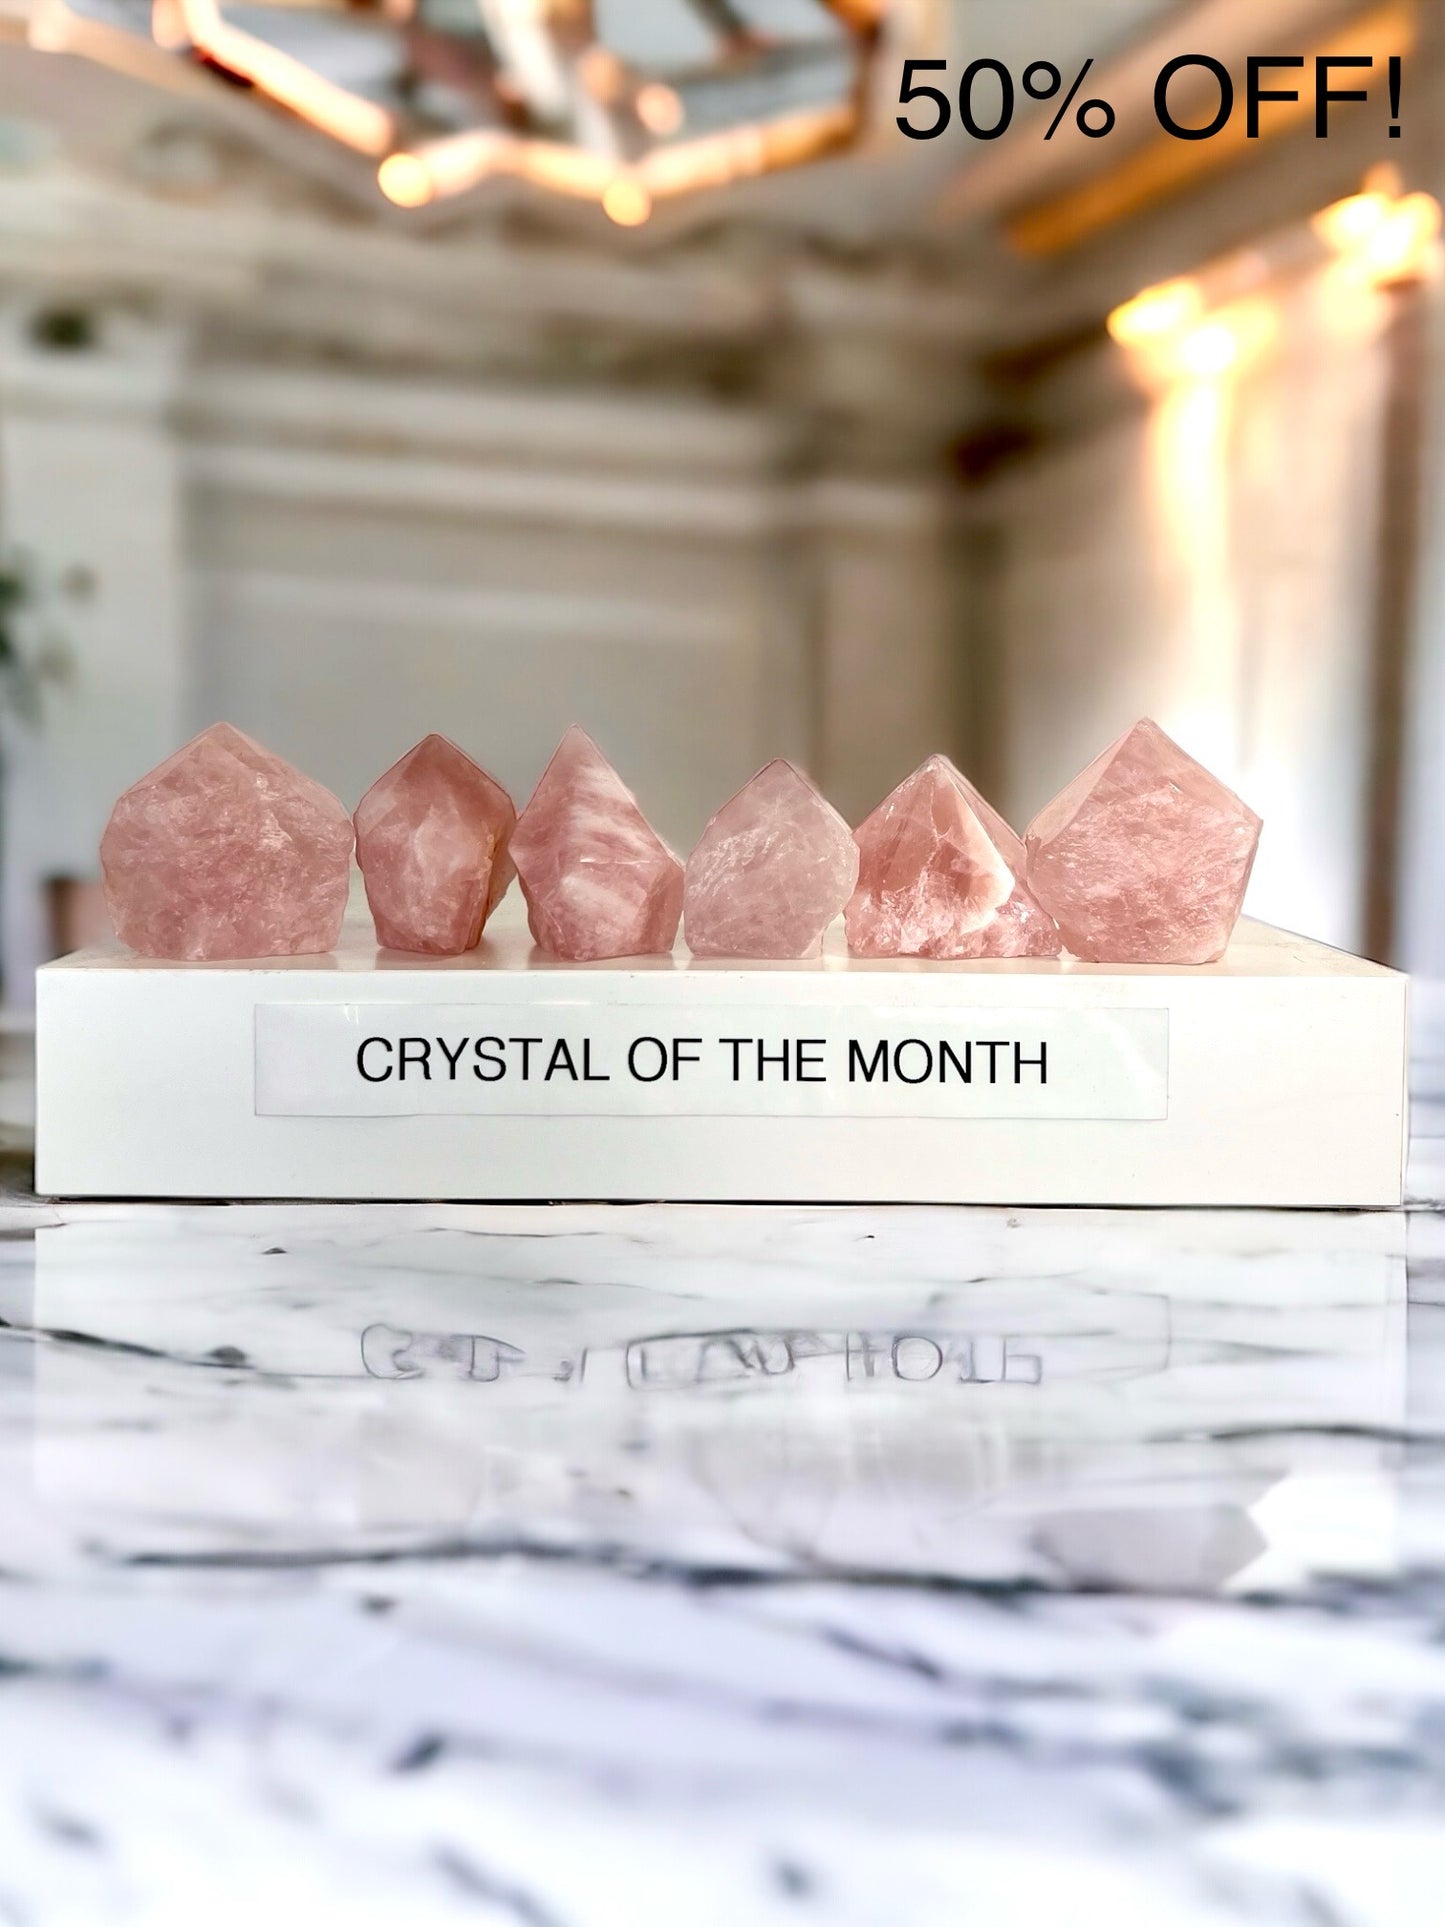 Crystal of the Month at The Crystal Gallery! 50% OFF